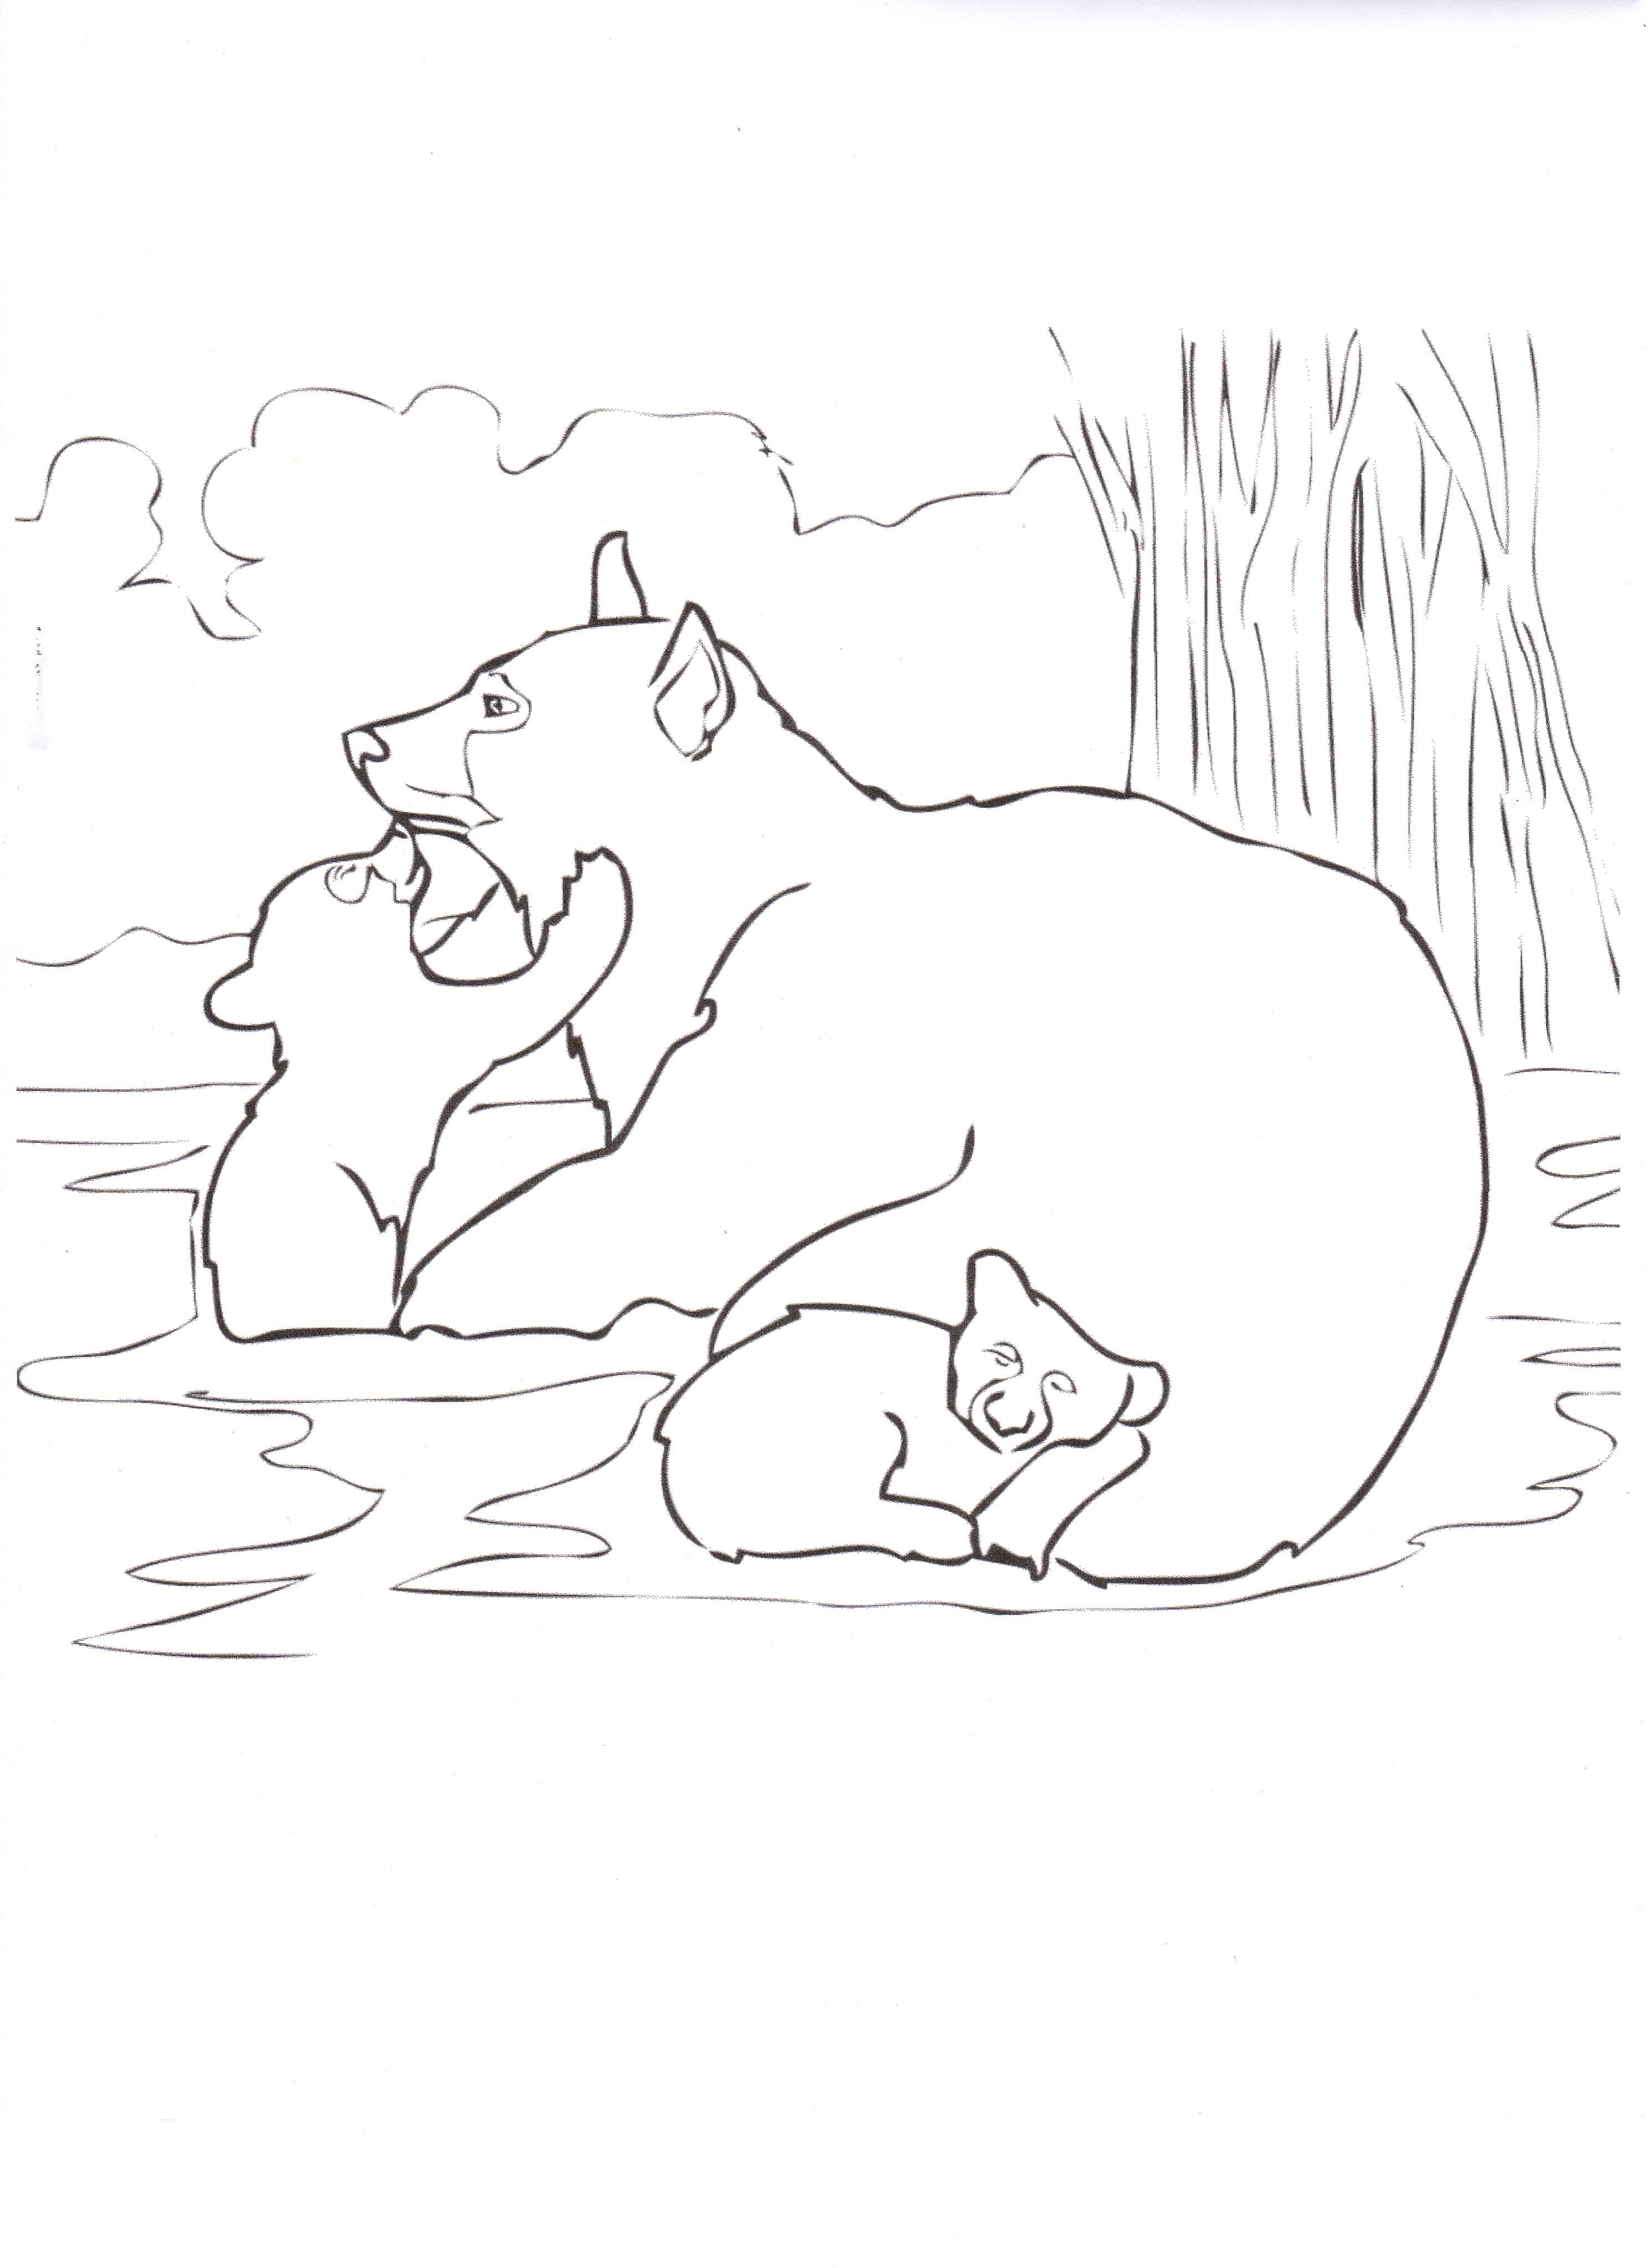 Animal coloring pages | Imagine Our Florida, Inc